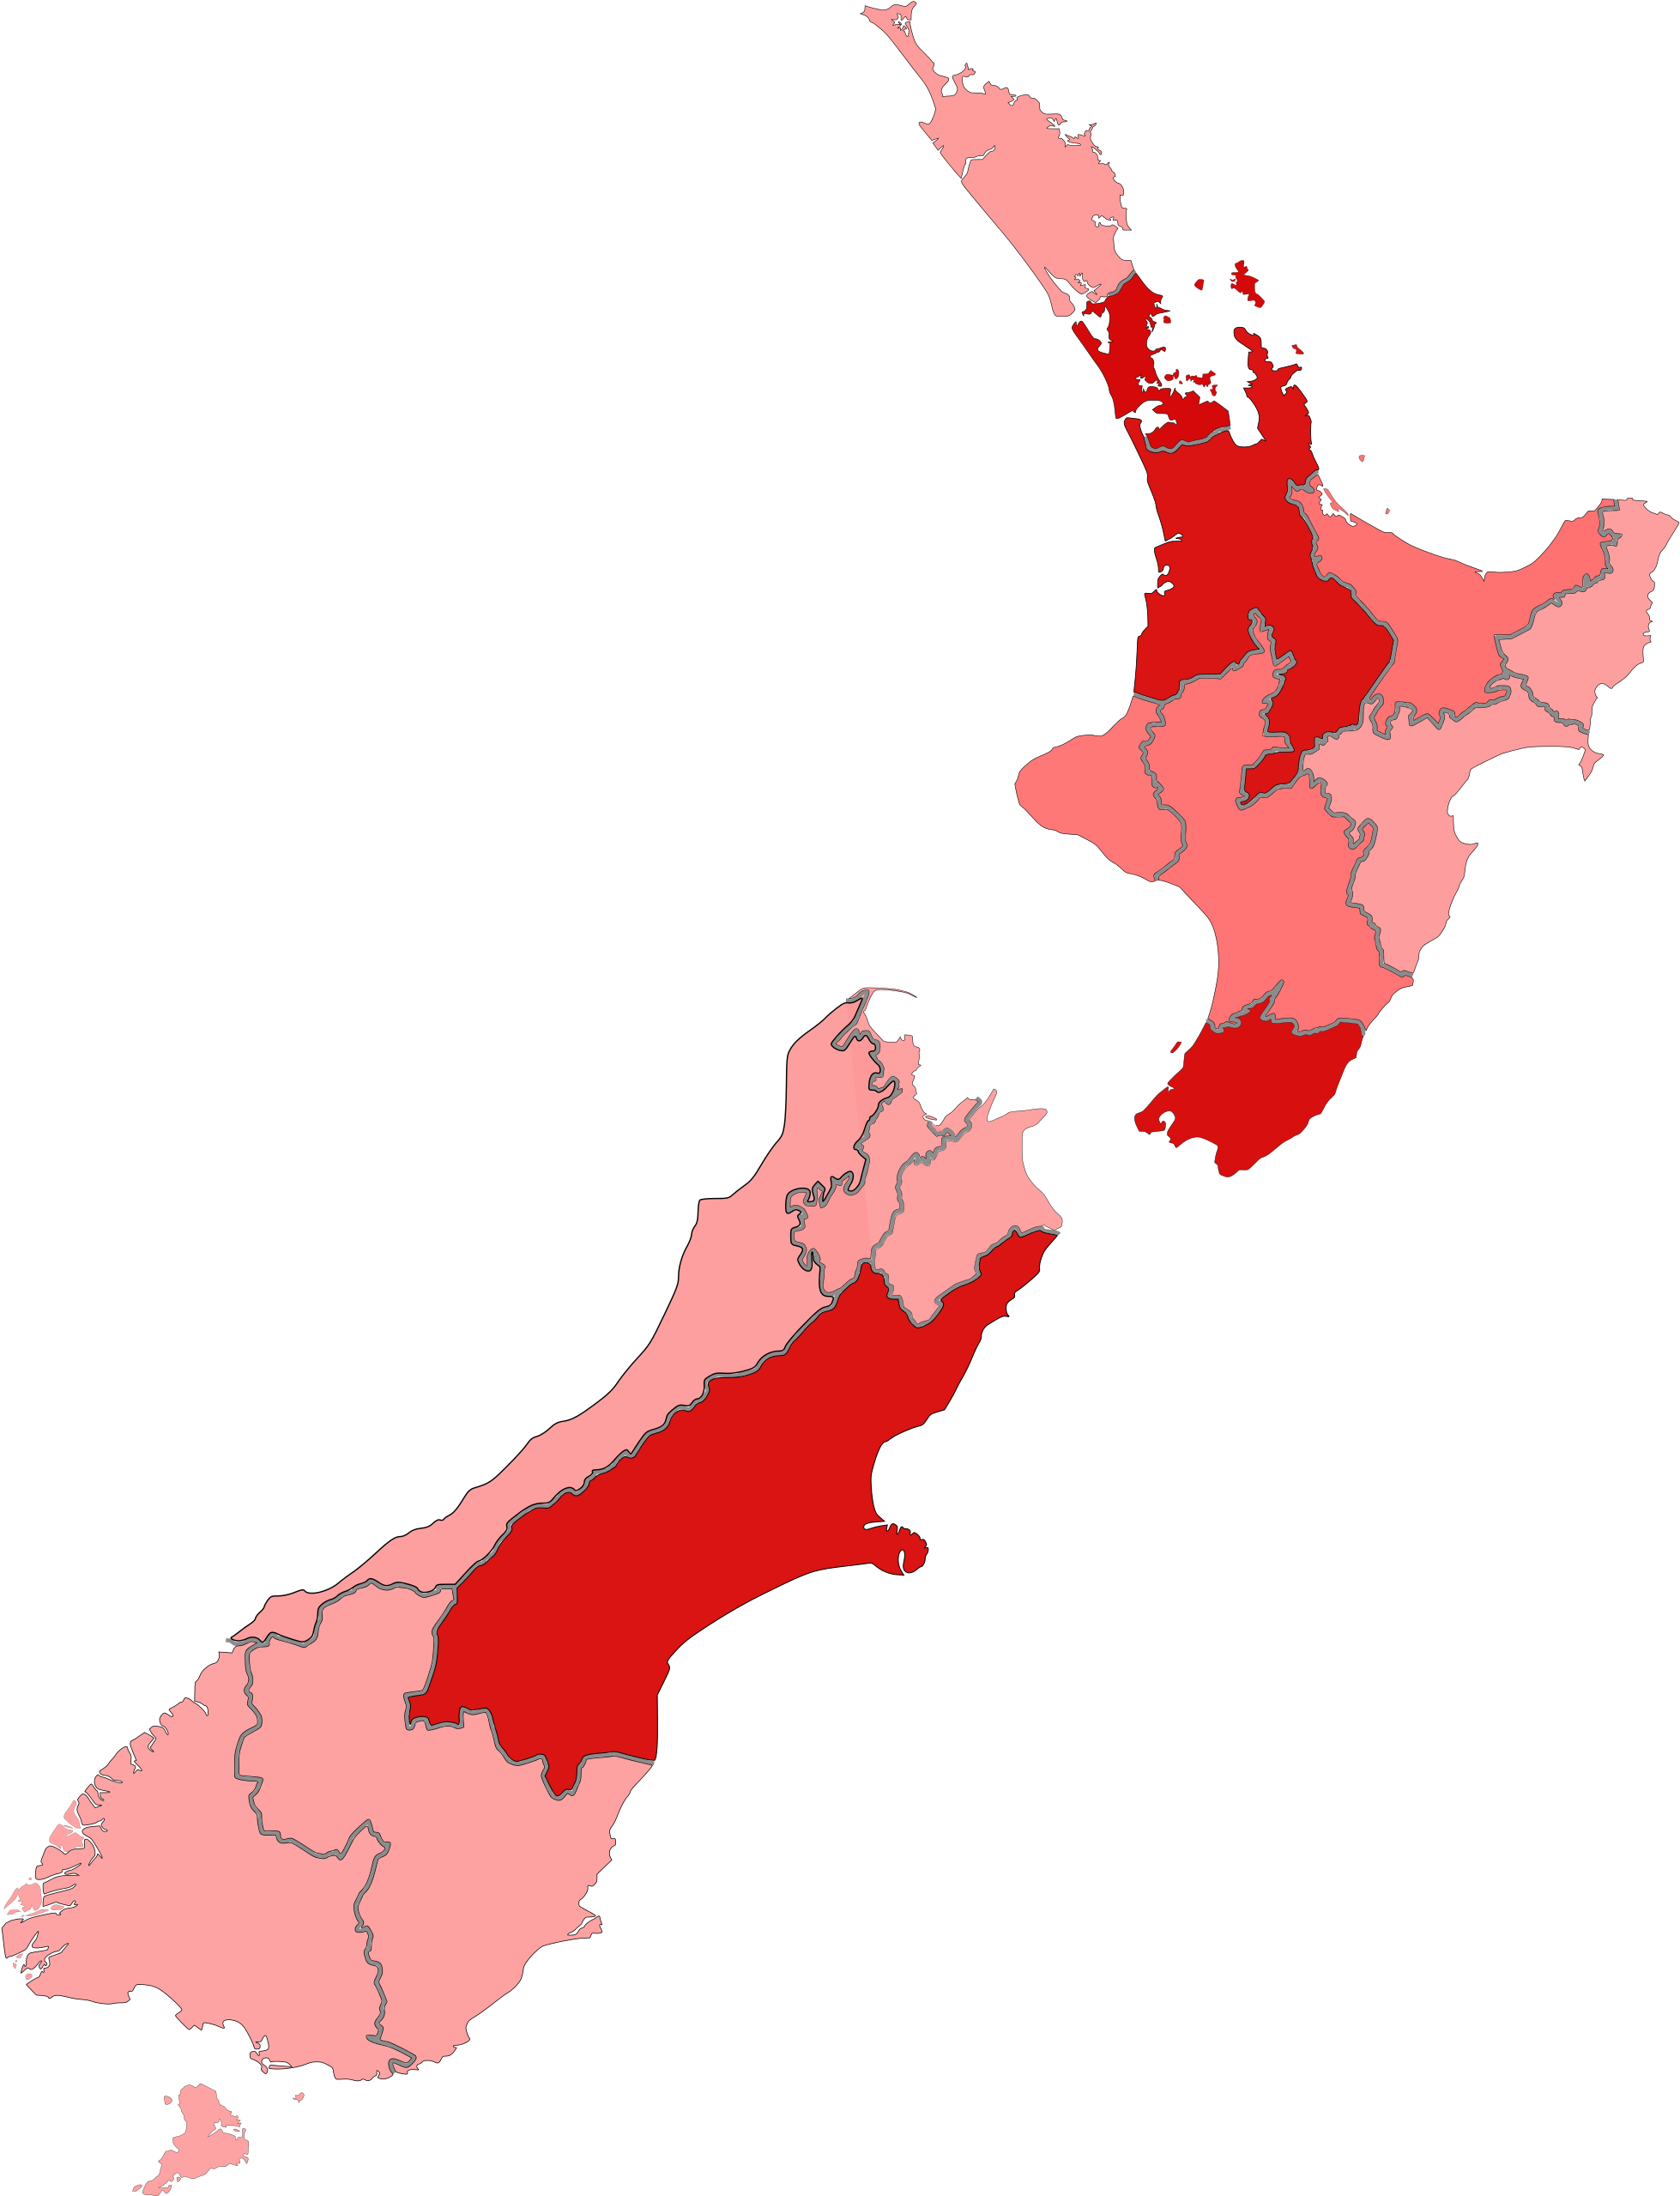 H1n1 New Zealand Map By Confirmed Cases - Passion Fruit Growing Nz (2000x2626)